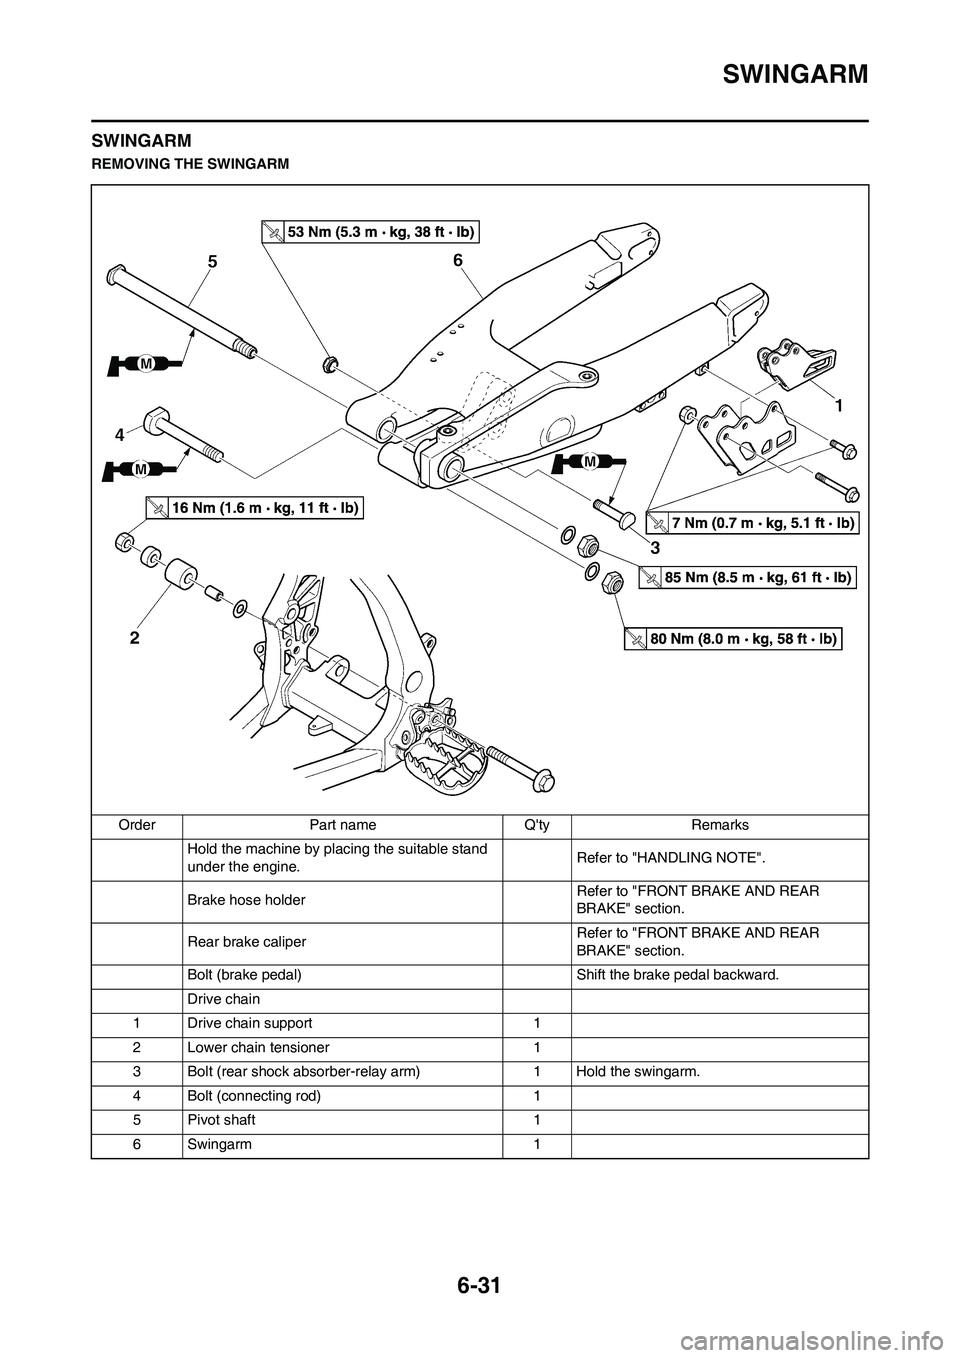 YAMAHA WR 450F 2011  Owners Manual 6-31
SWINGARM
SWINGARM
REMOVING THE SWINGARM
Order Part name Qty Remarks
Hold the machine by placing the suitable stand 
under the engine.Refer to "HANDLING NOTE".
Brake hose holder Refer to "FRONT B